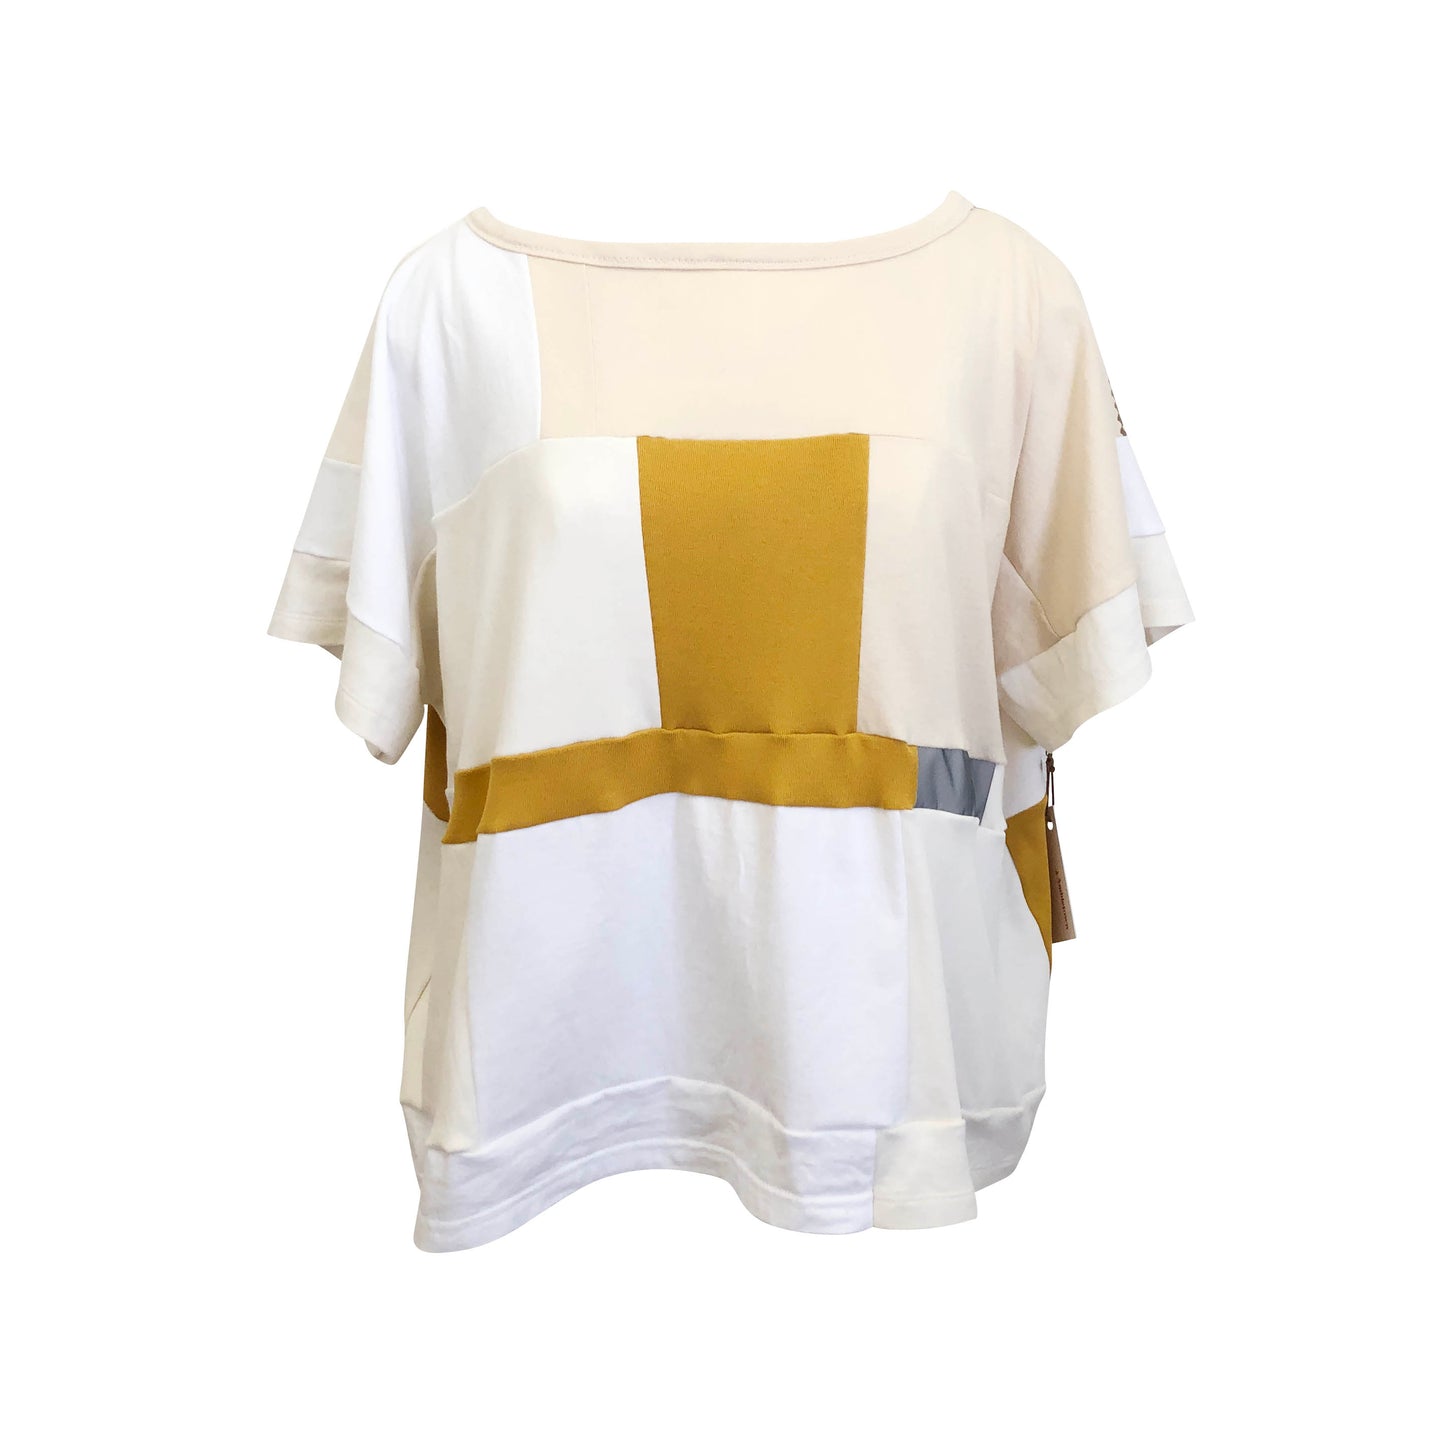 Soar Patchwork #3 - Cream / Yellow - One Size